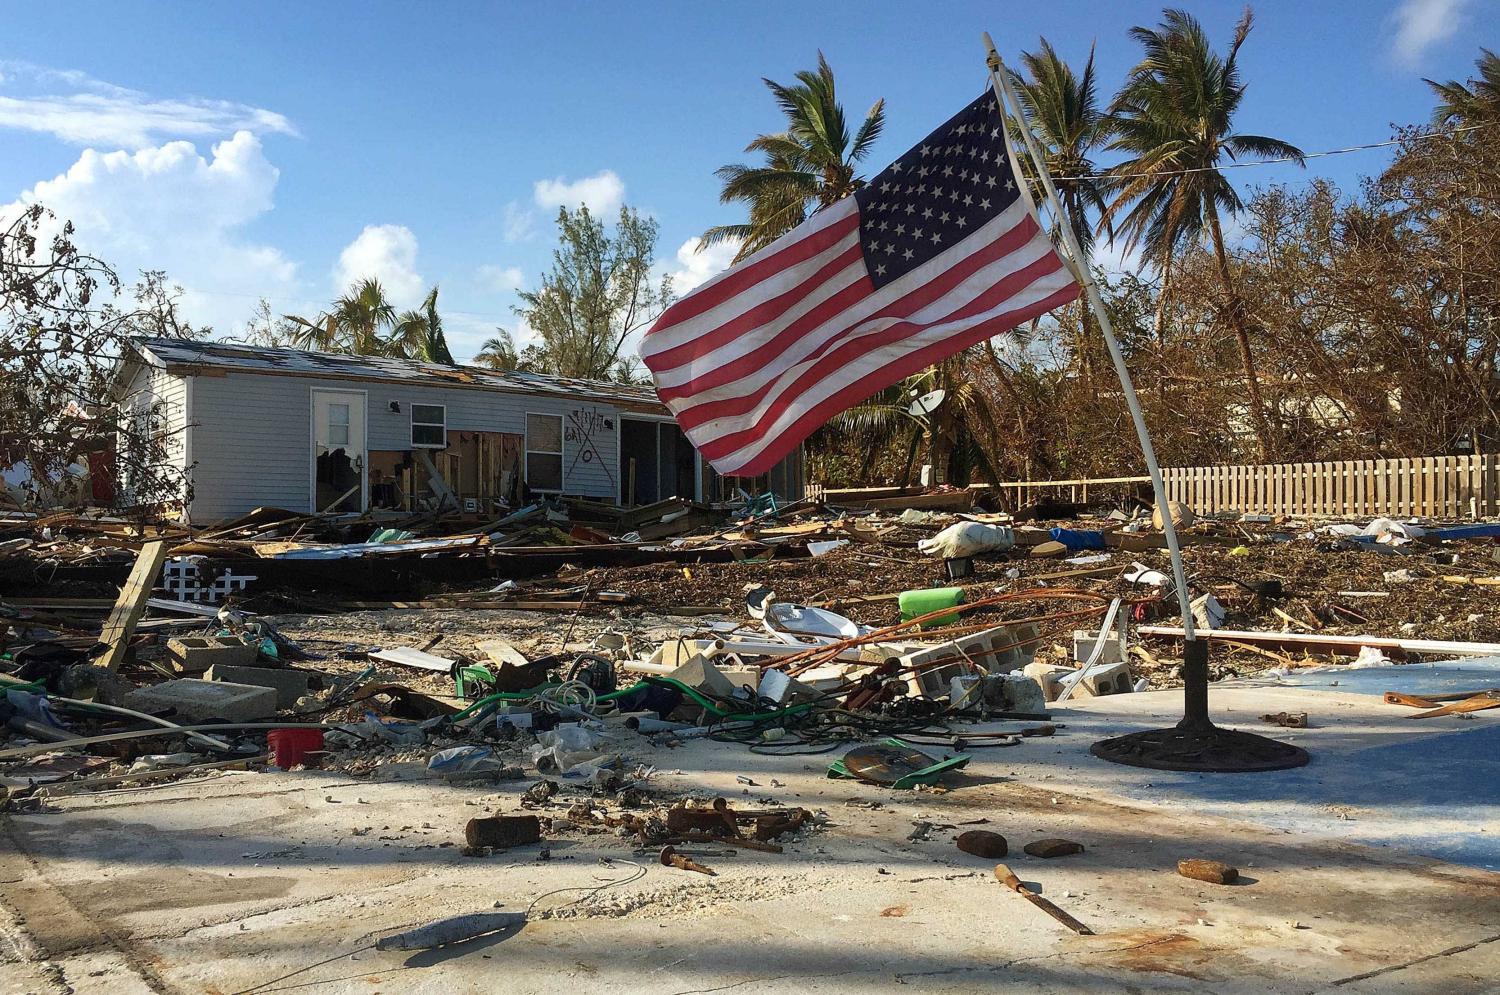 An American Flag waves where a home in the Sea Breeze Resort in Islamorada, Florida, used to stand onSep 14, 2017. The home was destroyed when Hurricane Irma brought high winds and flooding to the area destroying most of the homes in the community.Usp News Hurricane Irma Usa Fl